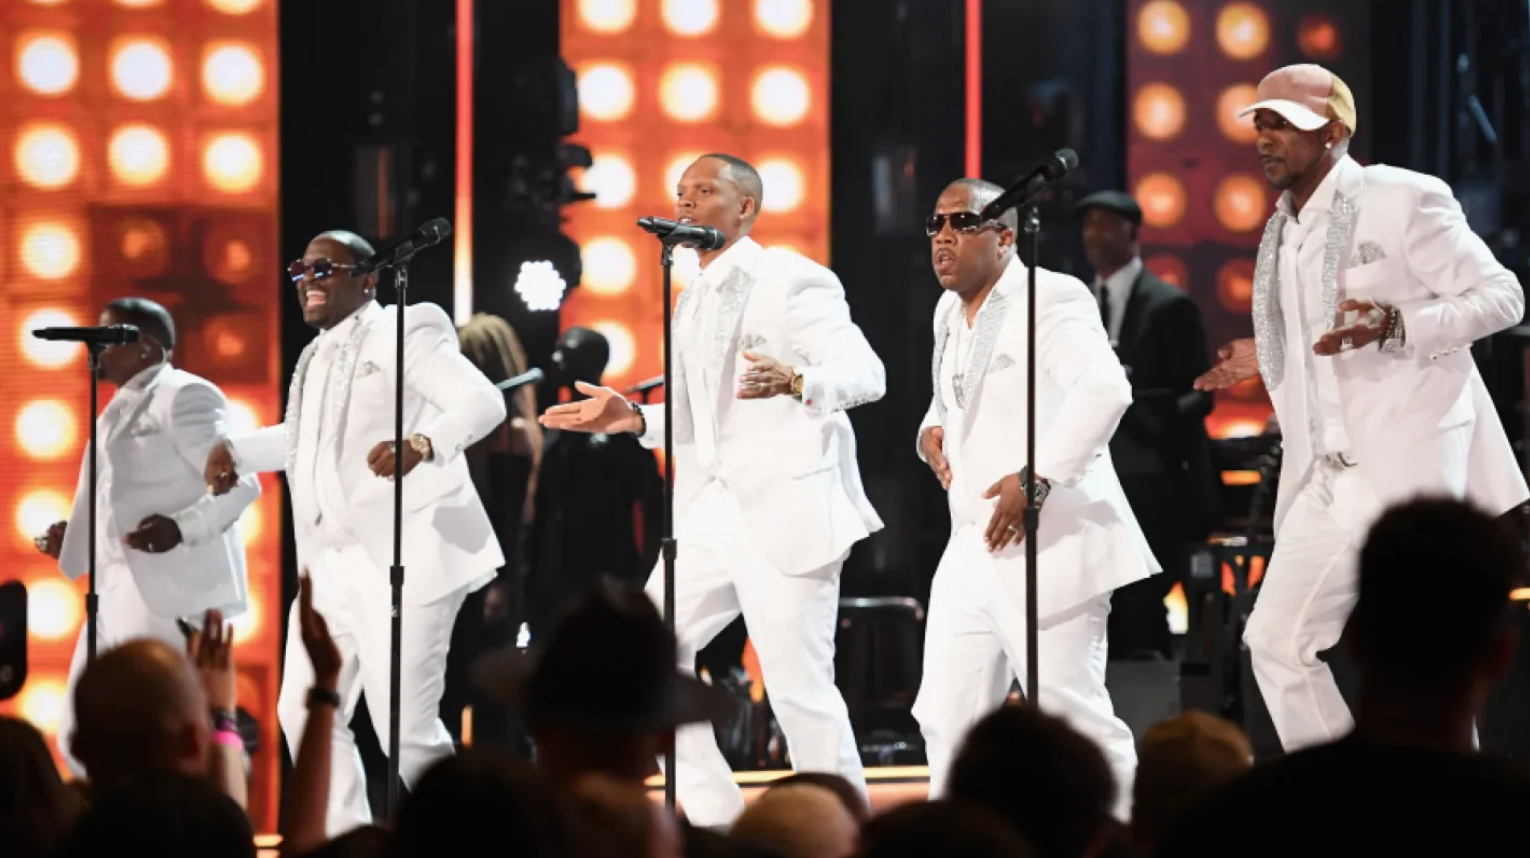 New Edition To Be Inducted Into NAACP Image Awards Hall Of Fame